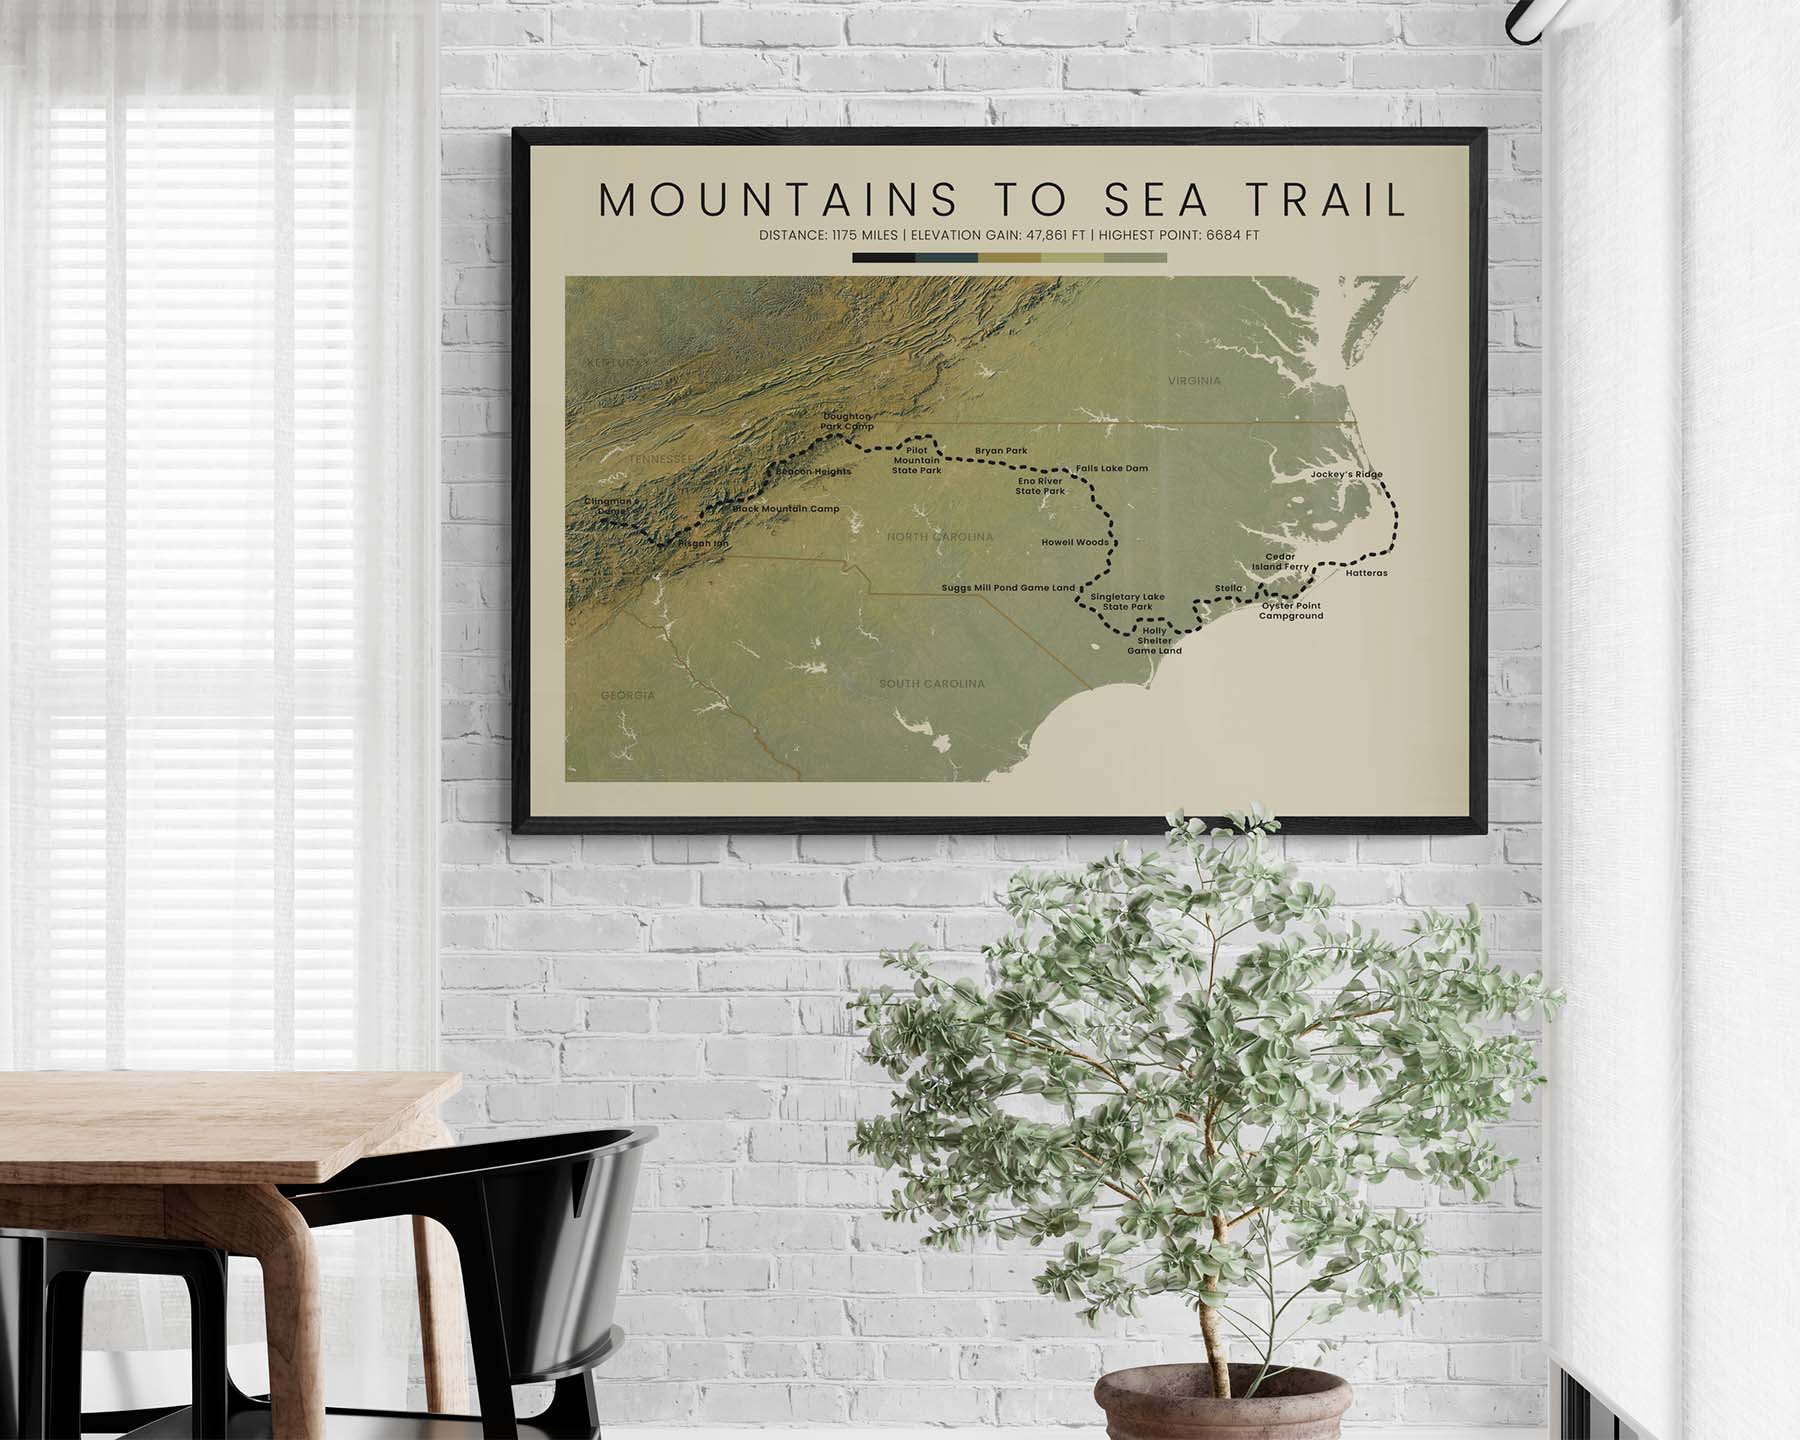 Mountains to Sea Trail (Tennessee to Atlantic Ocean) Trail Poster with Topographic Map in Modern Wall Art Decor